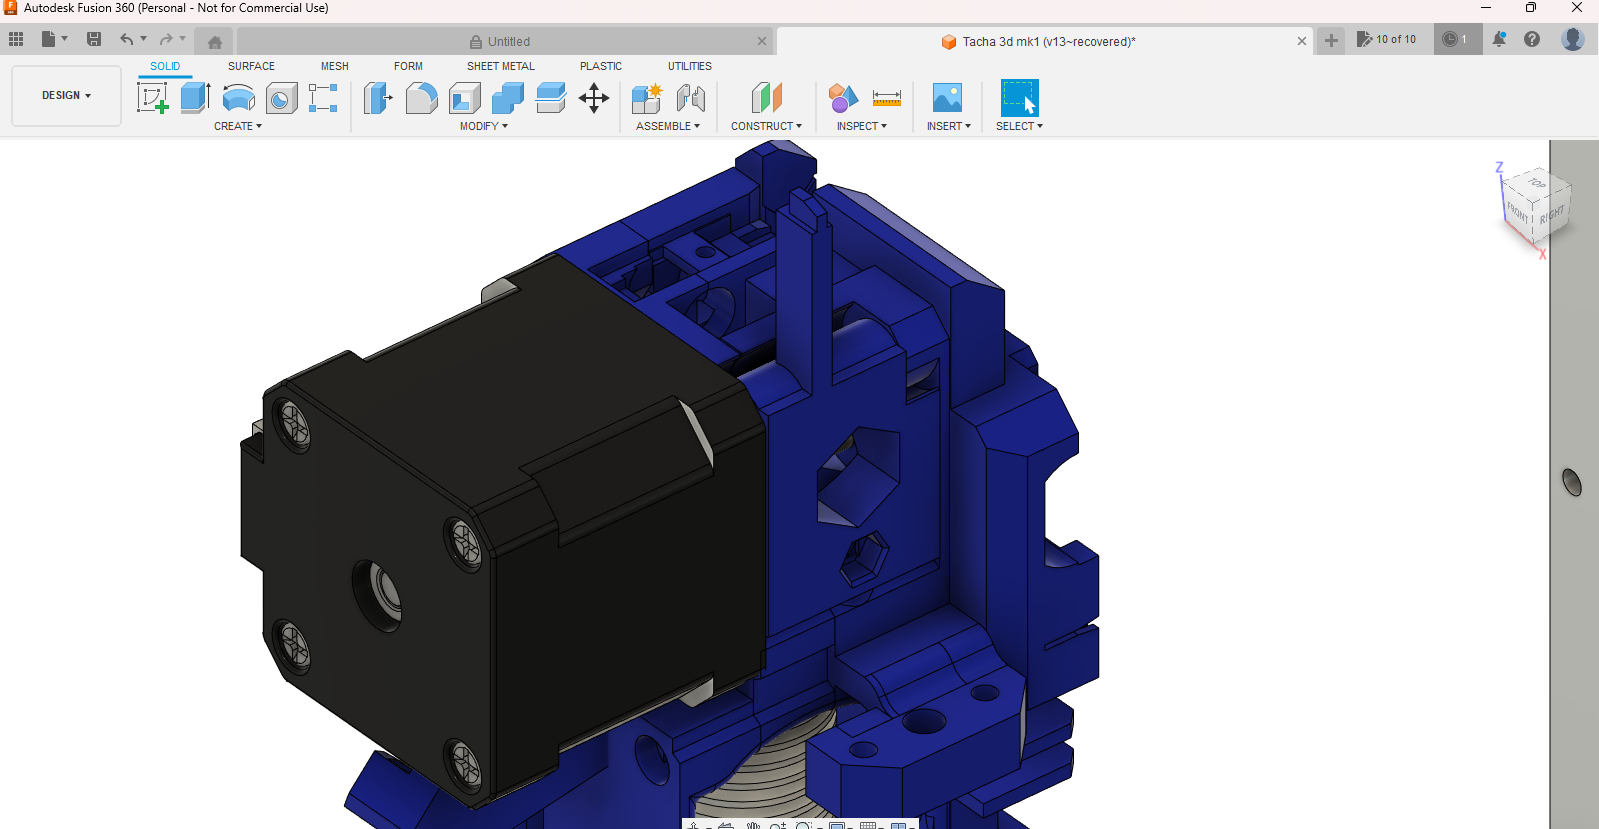 Autodesk Fusion 360 (Personal - Not for Commercial Use) 6_29_2023 10_05_54 PM.png